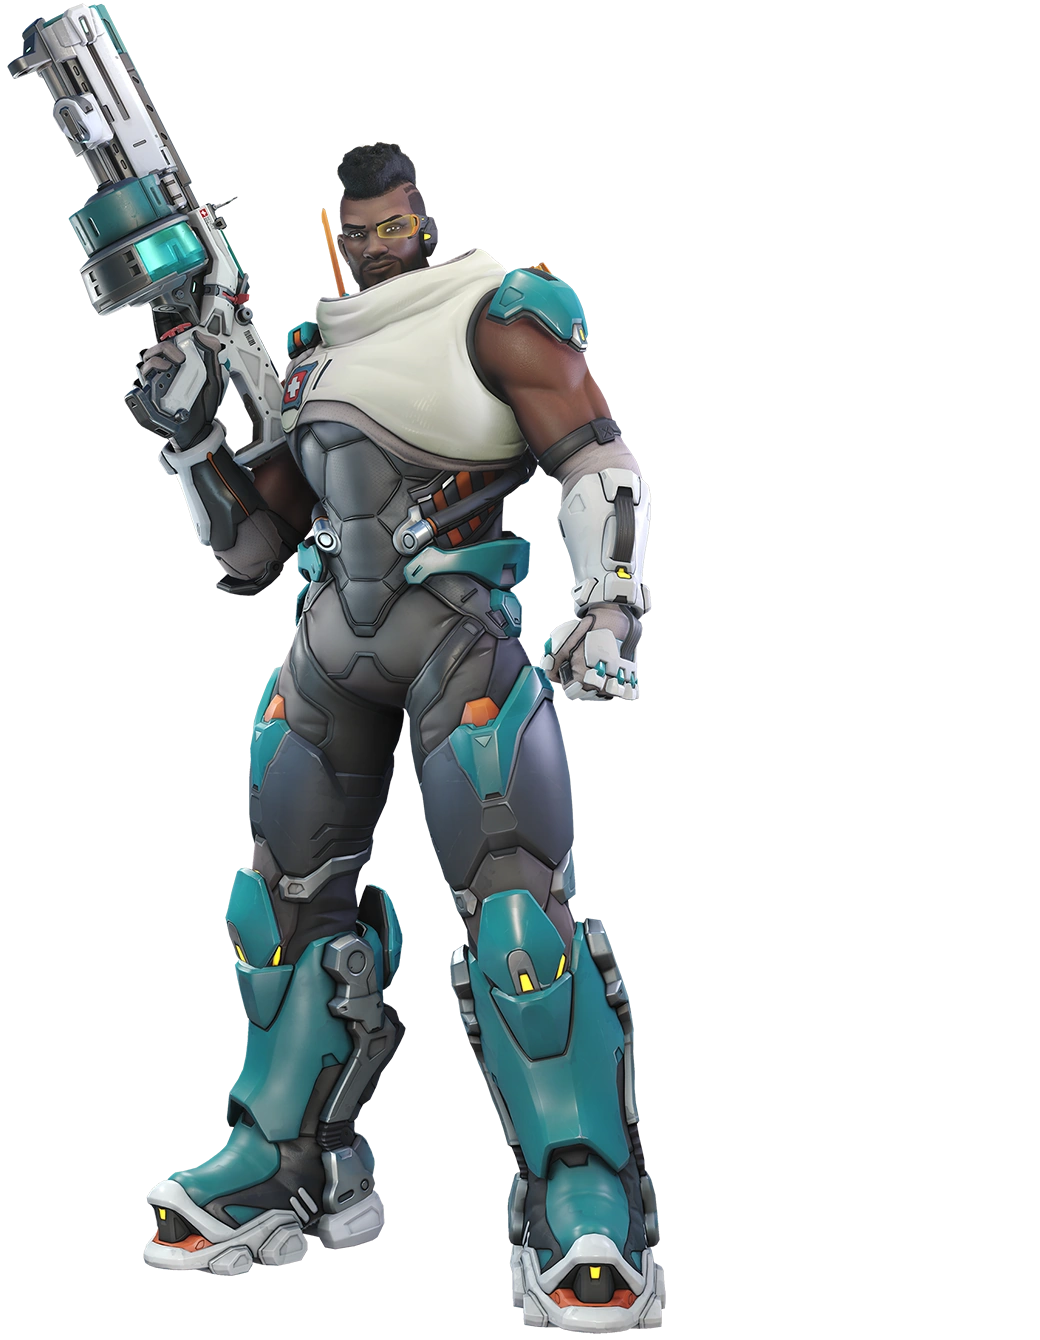 Overwatch Wiki - Baptiste Overwatch Png,Overwatch Tracer Png